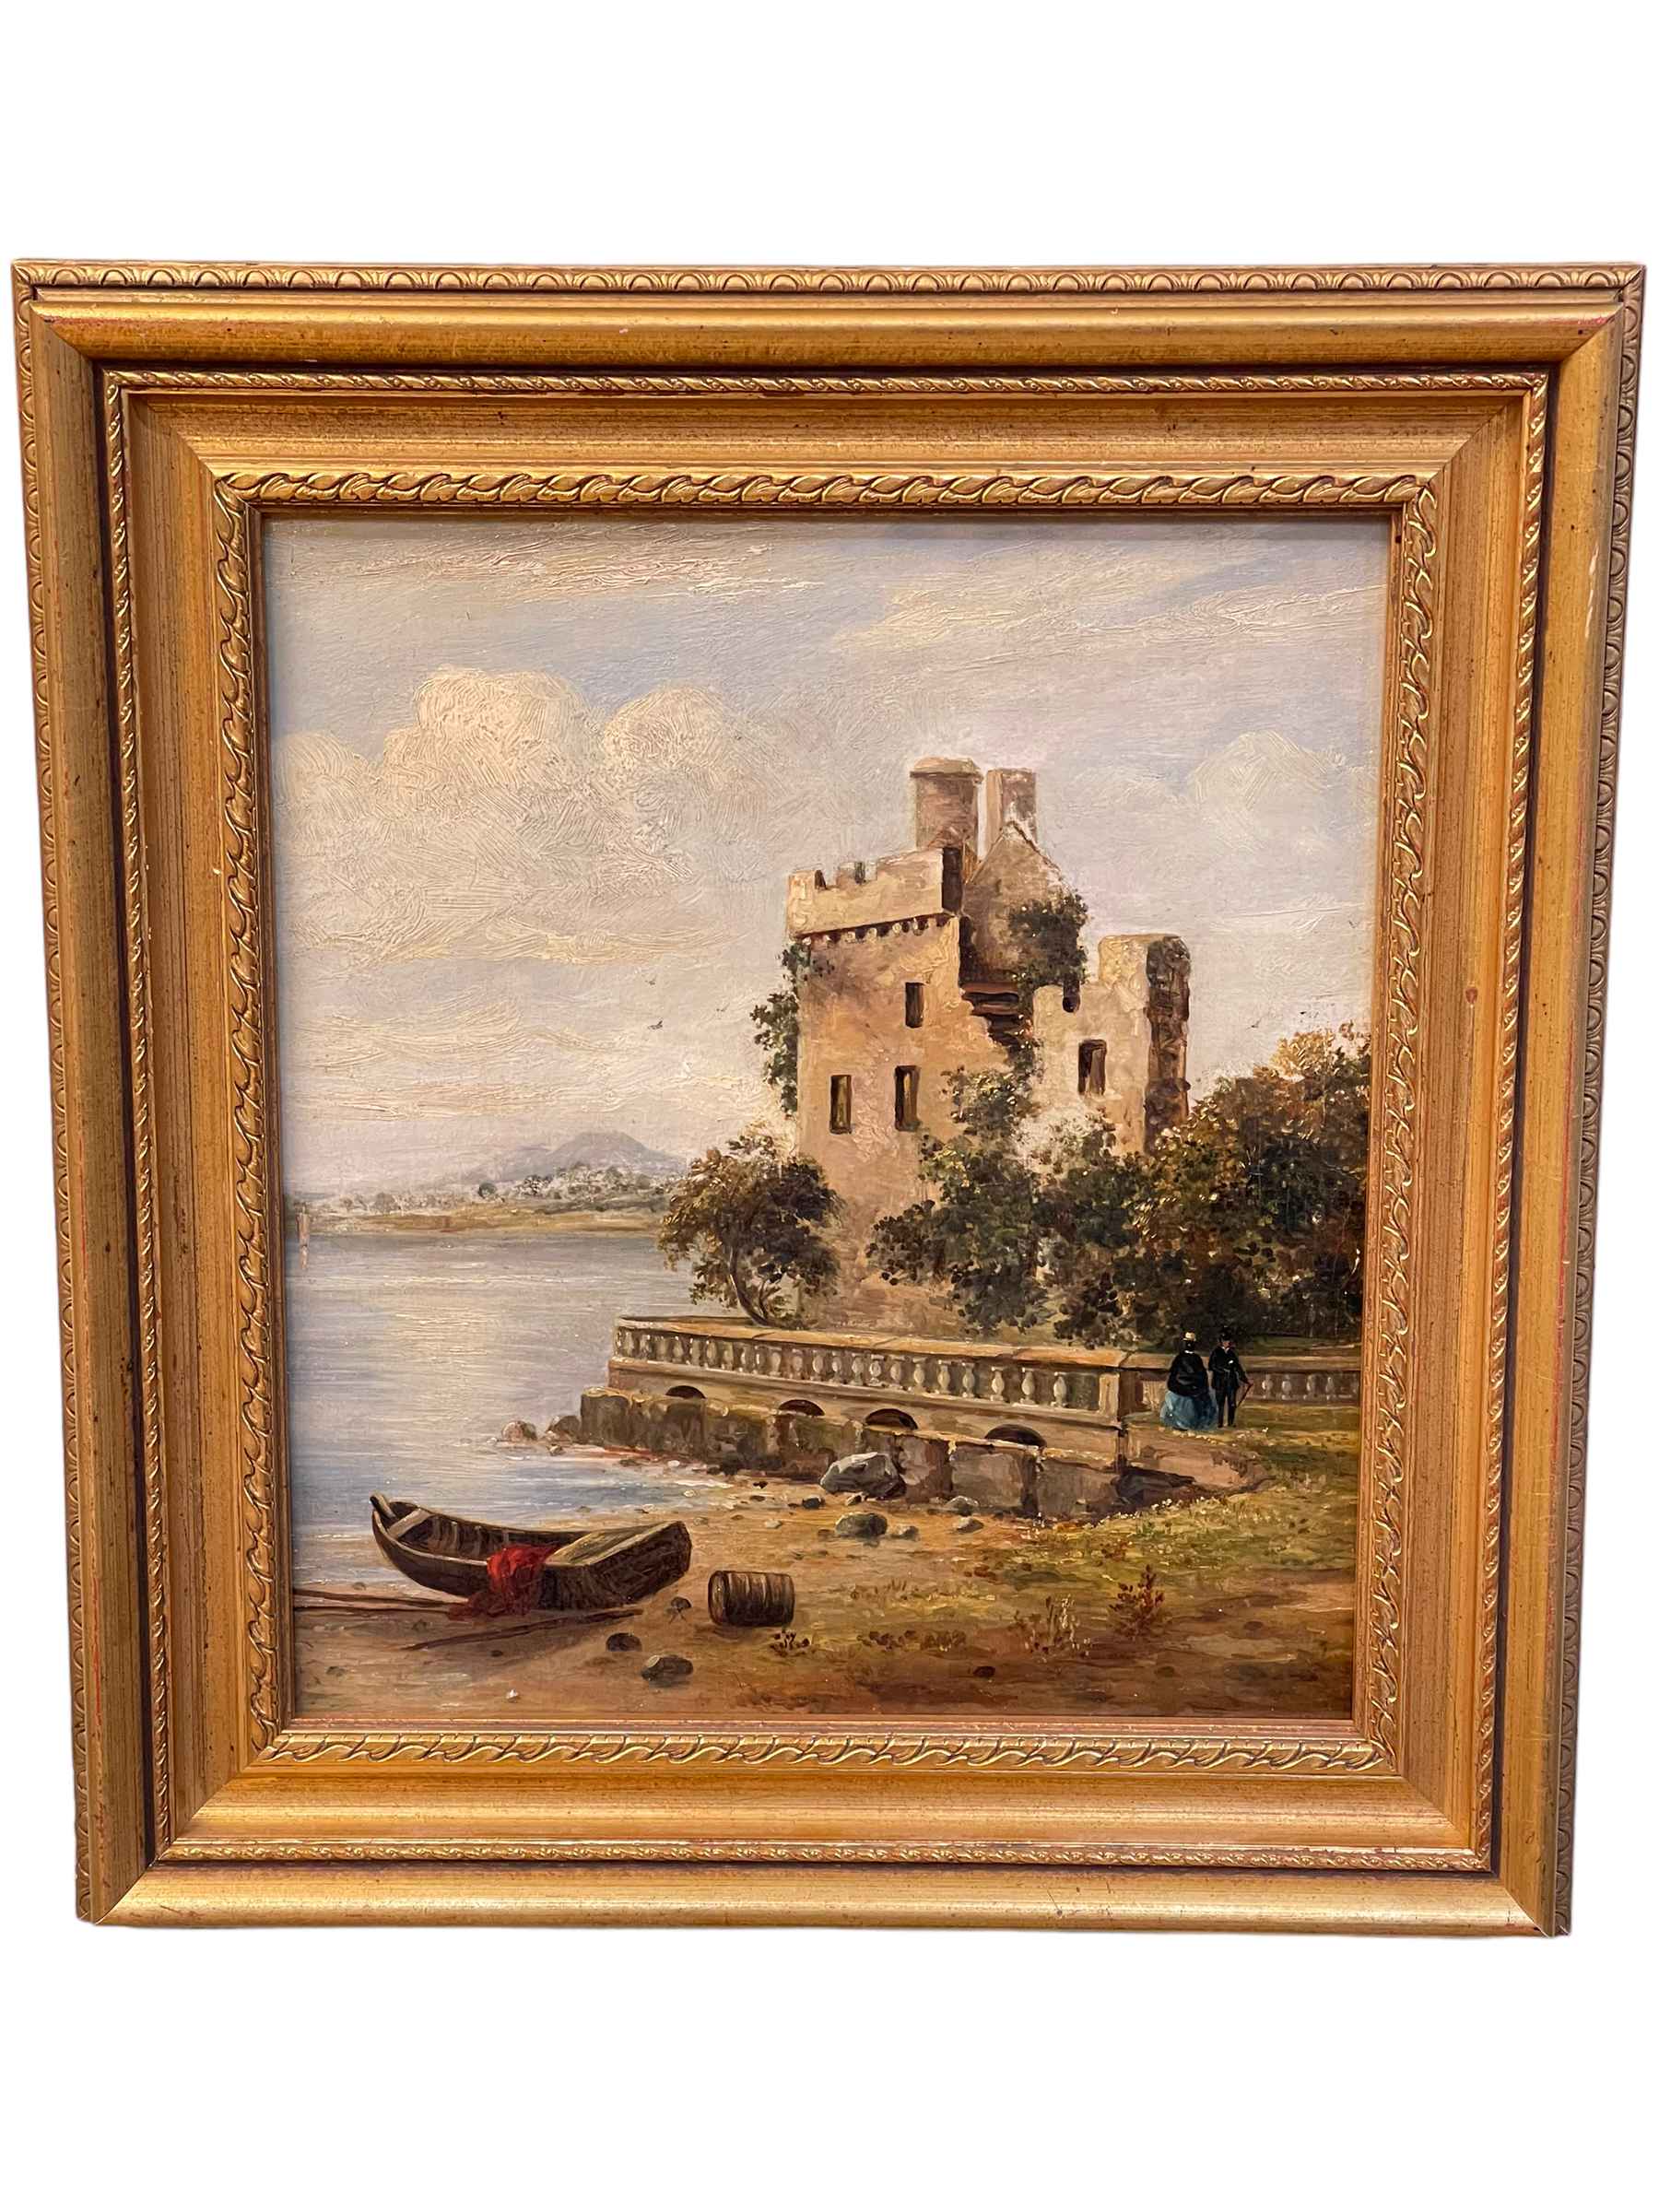 William Sinclair, Figures by a Lakeside Building, 19th Century oil on board, 27.